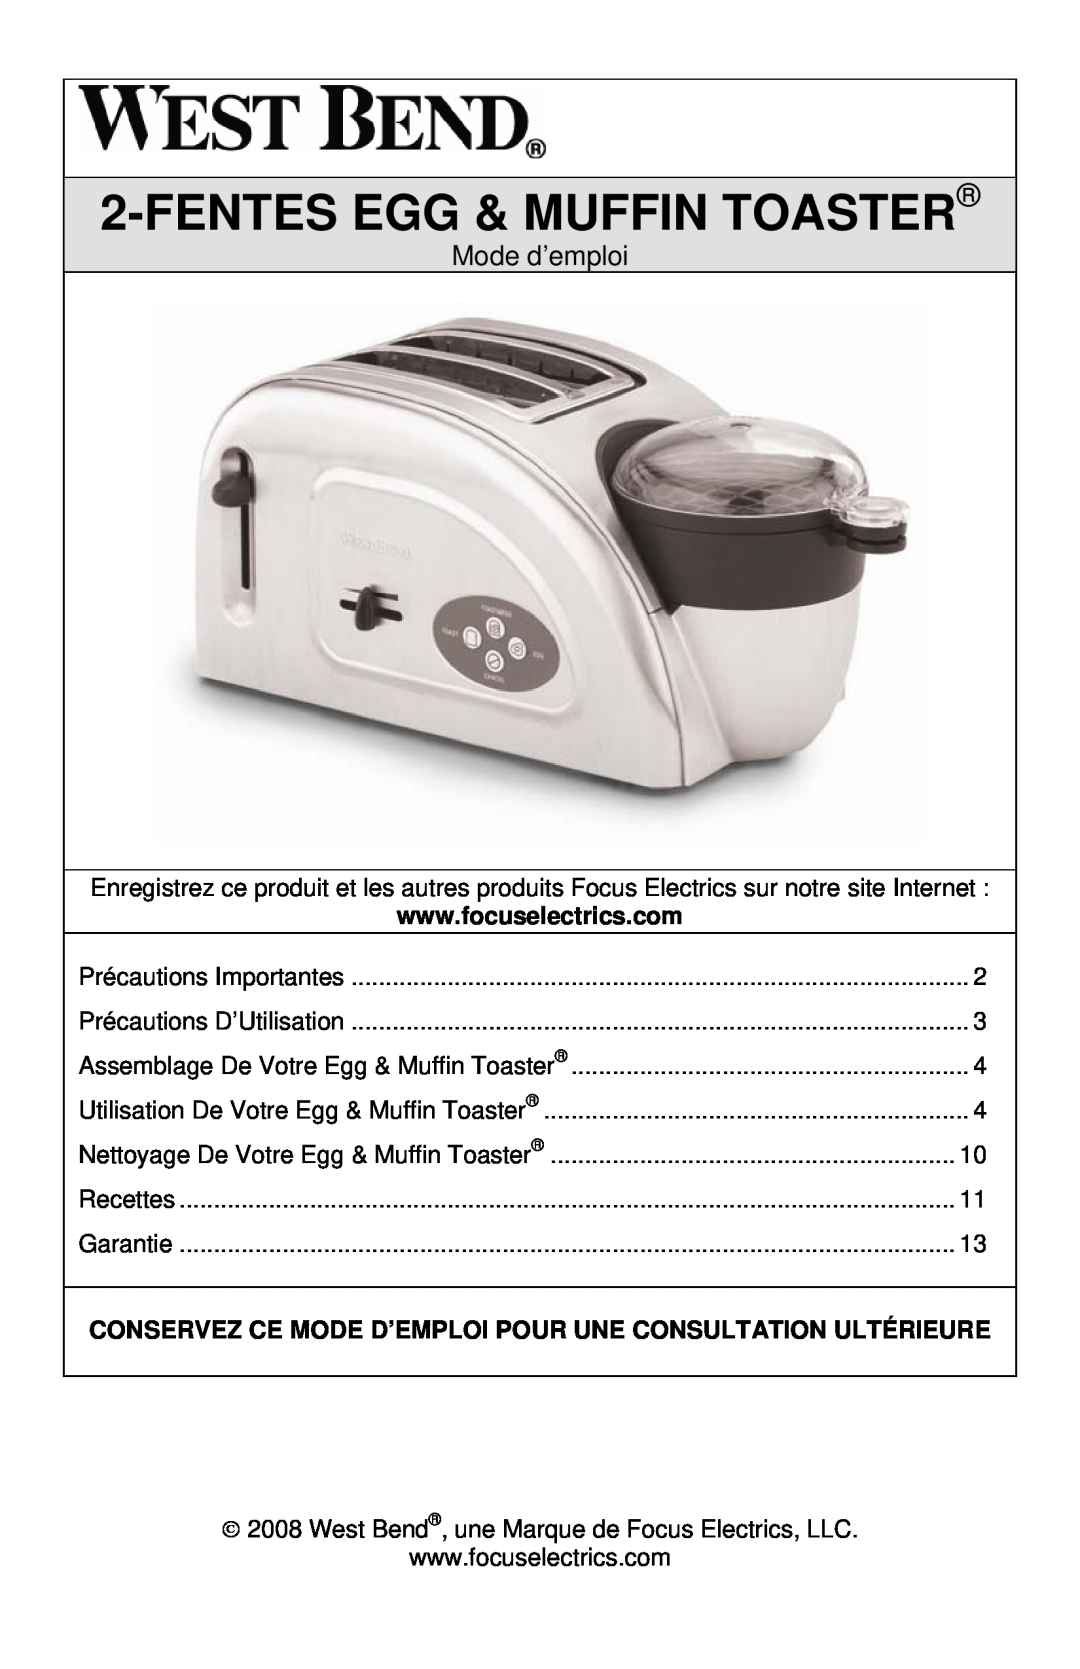 West Bend L5769, 78822 instruction manual Fentesegg & Muffin Toaster, Mode d’emploi 